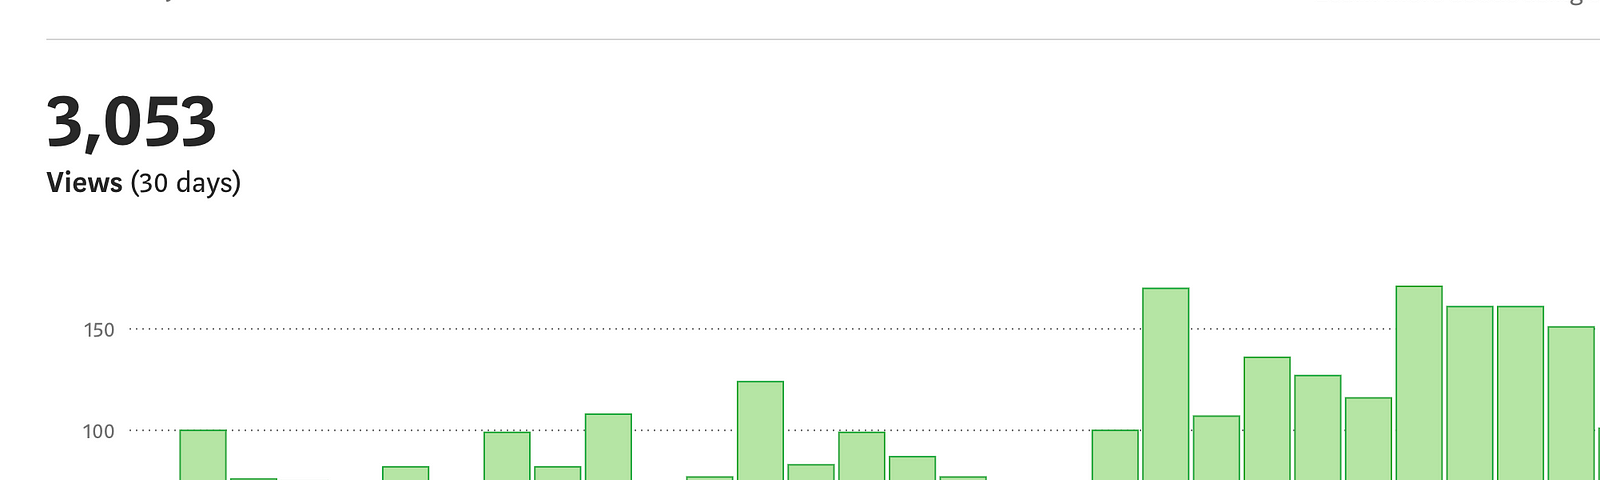 I doubled my daily views by engaging genuinely